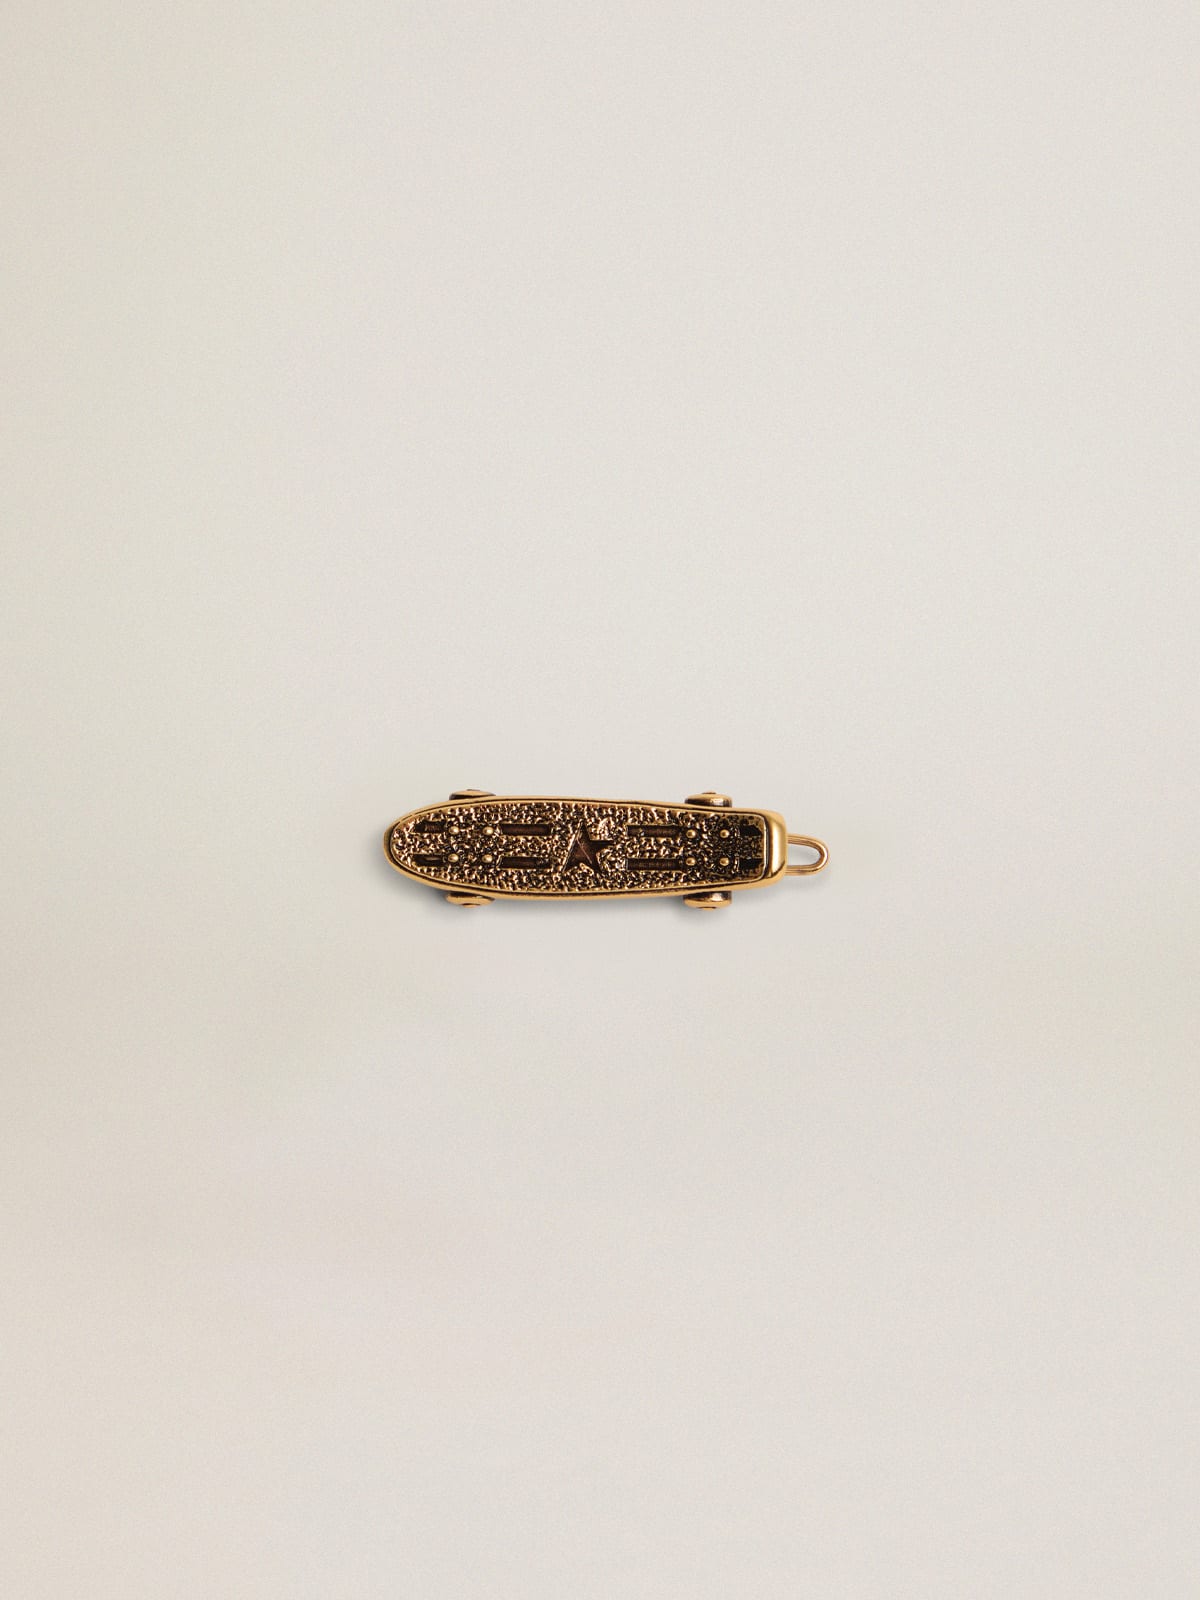 Timeless Jewelmates Collection lace accessory in old gold color in the shape of a skateboard